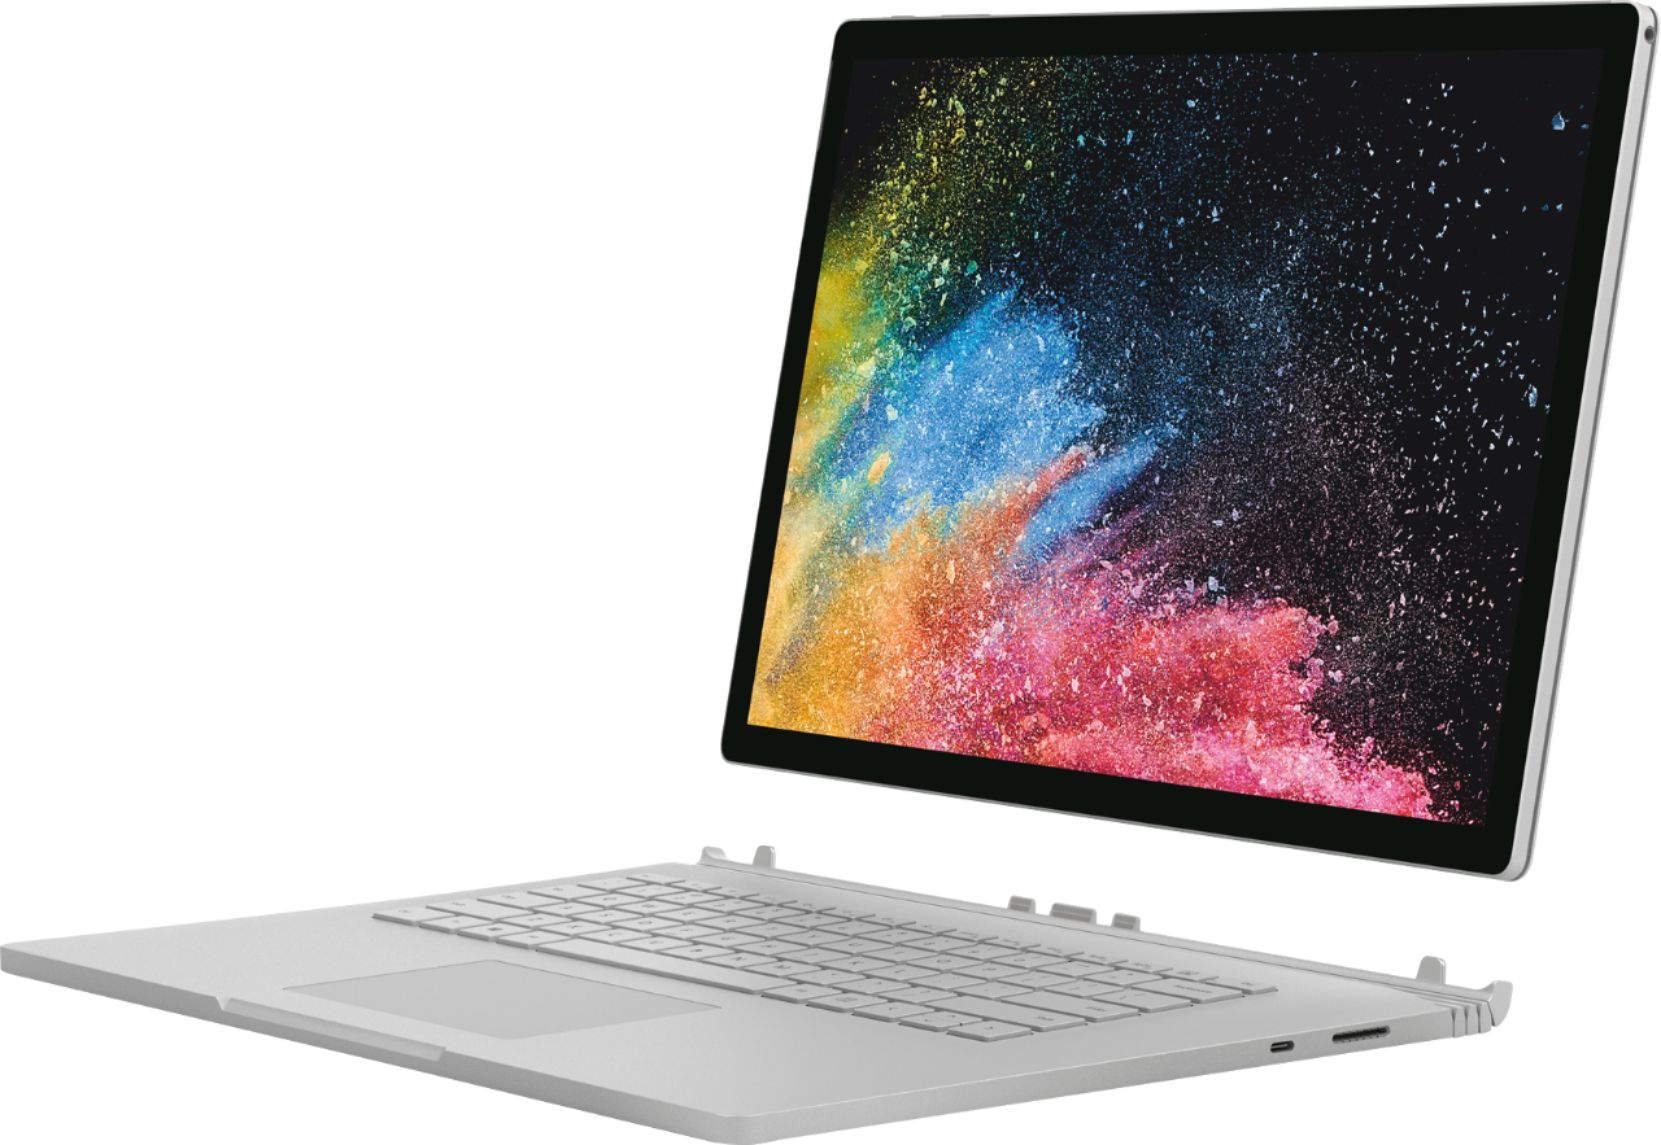 Angle View: Microsoft - Geek Squad Certified Refurbished Surface Book 3 15" Touch-Screen - Intel Core i7 - 32GB Memory - 512GB SSD - Platinum